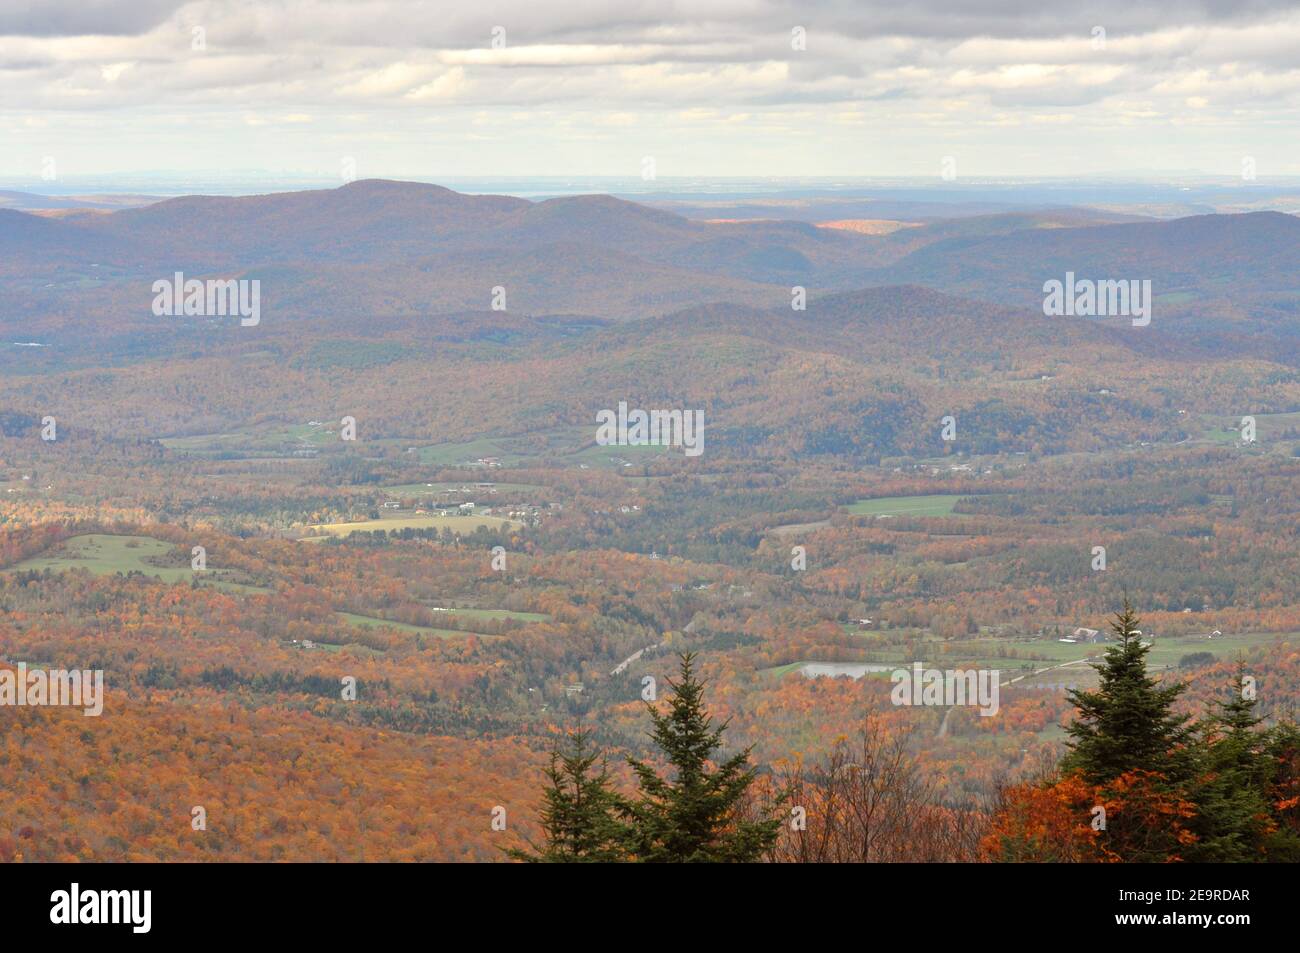 Fall Foliage of Green Mountains from top of Sterling Mountain near Smugglers' Notch in Vermont VT, USA. Stock Photo